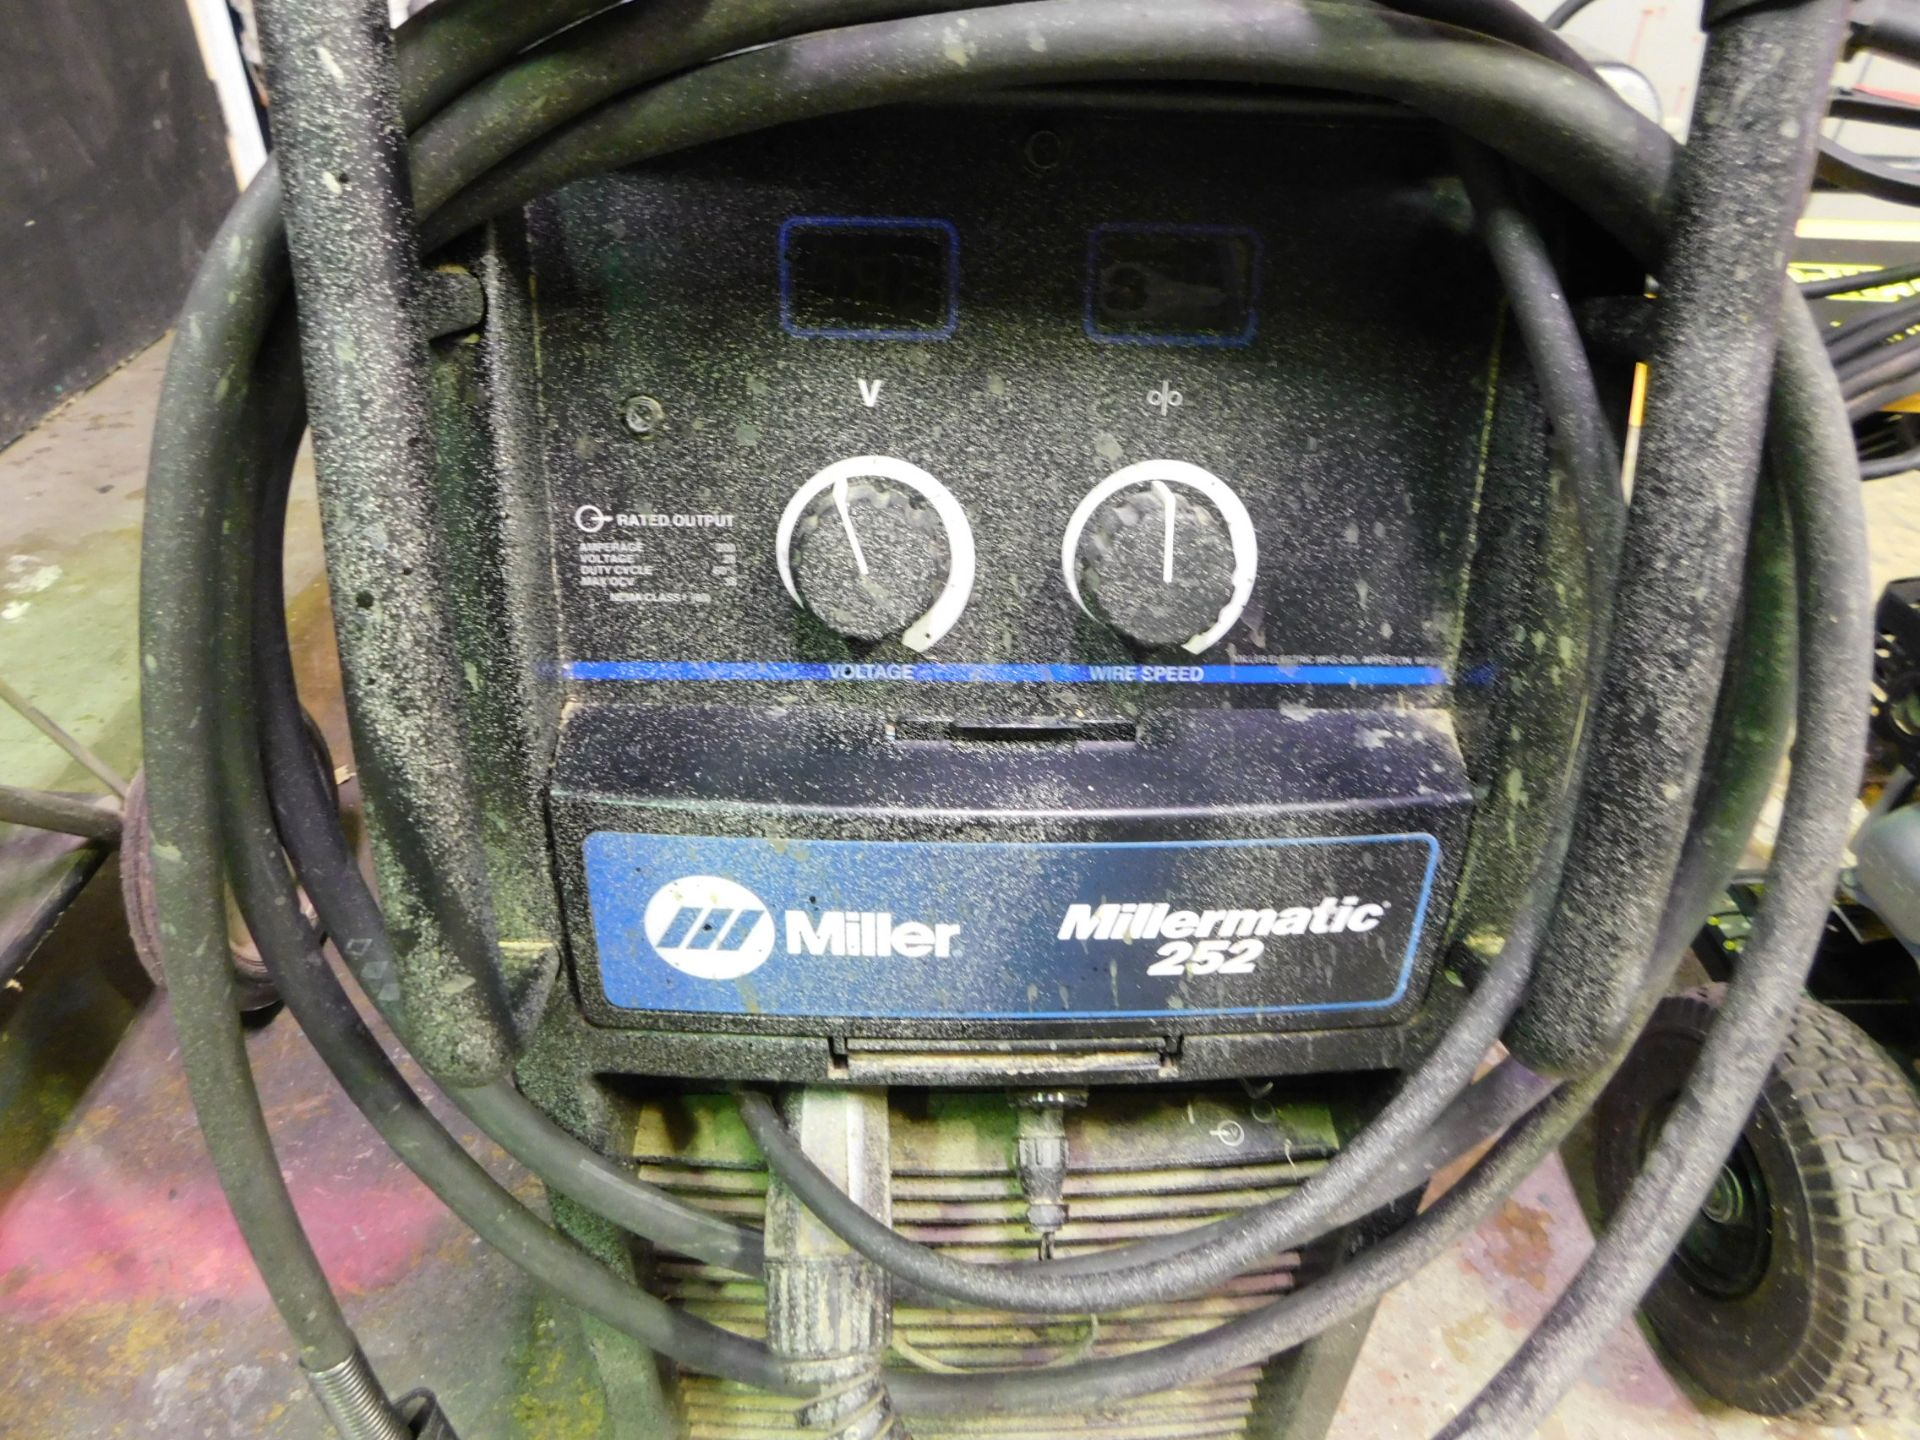 Miller Millermatic 252 Mig Welder SN MH030546N, with Mig Gun, (NOTE: Tank does not go with welder) - Image 2 of 4